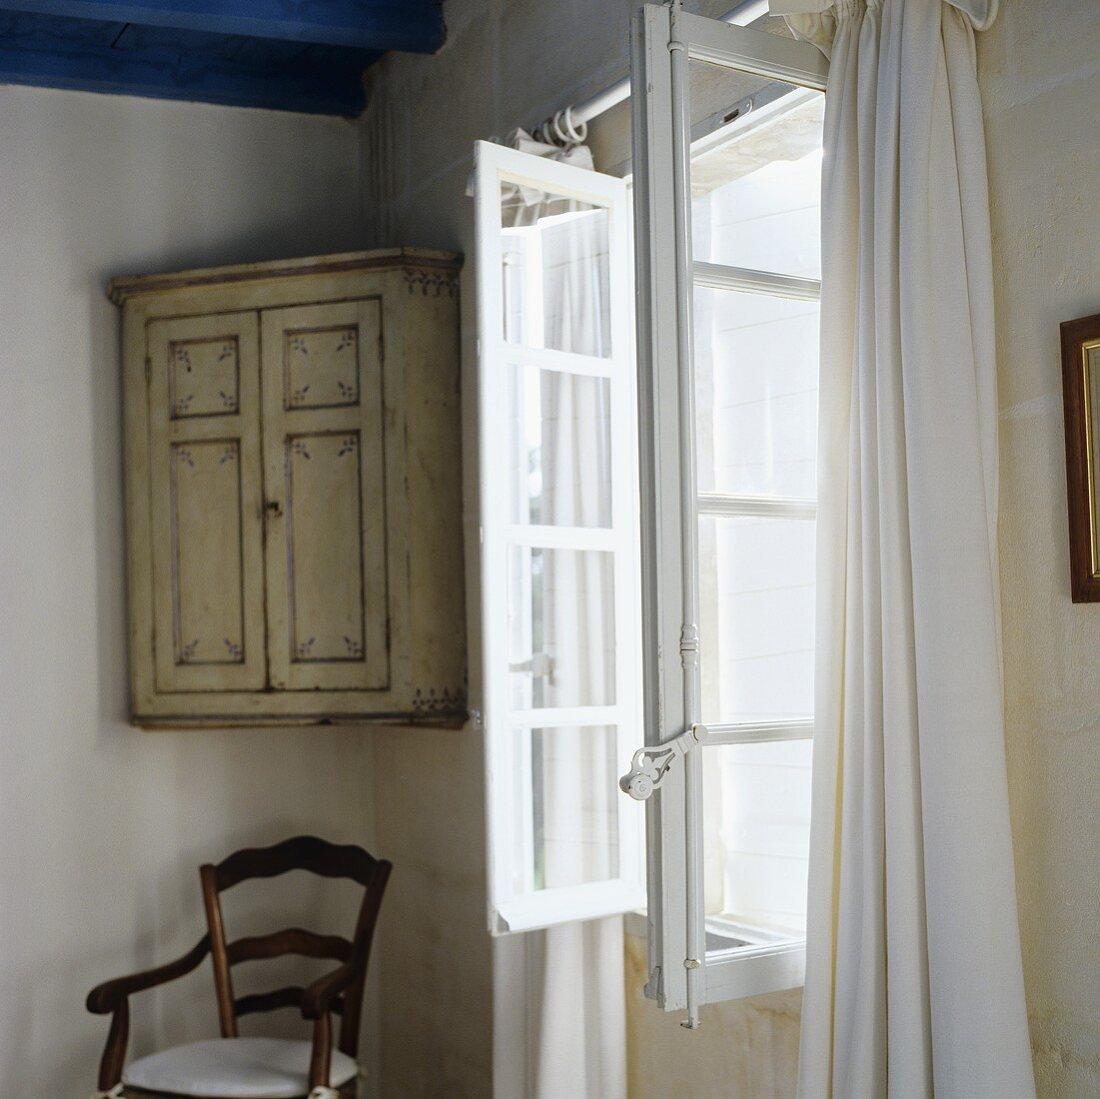 An old fashioned wall cupboard in a corner next to an open window